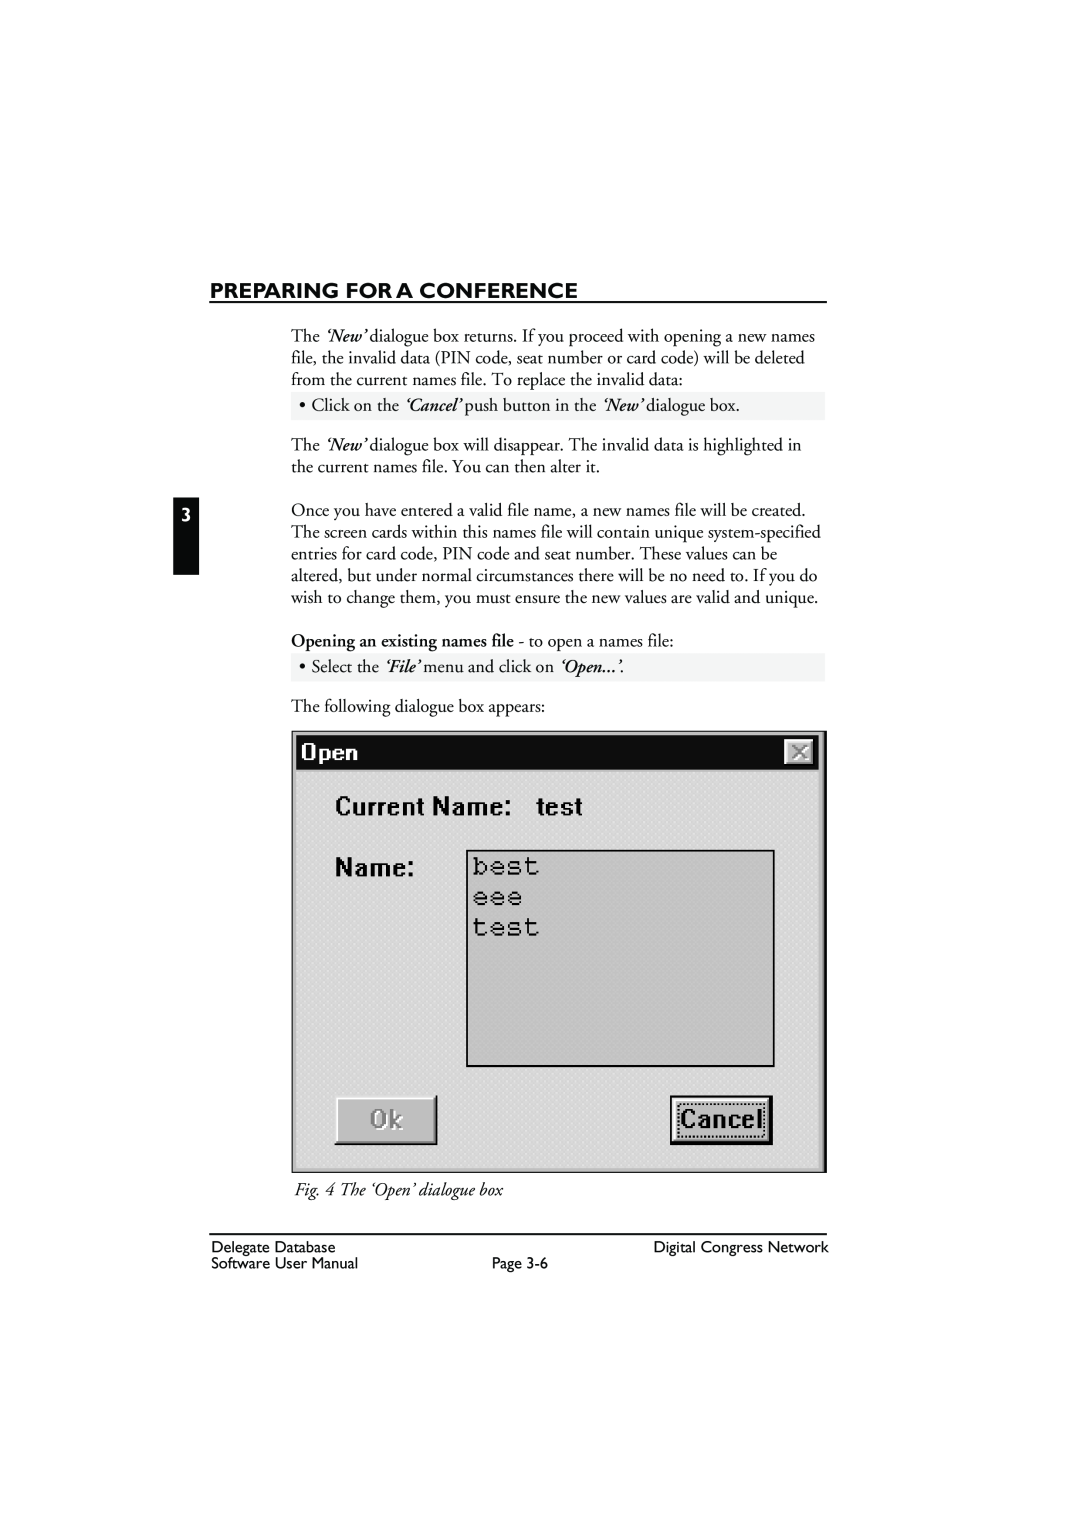 Bosch Appliances LBB3580 user manual The ‘Open’ dialogue box, Preparing For A Conference 